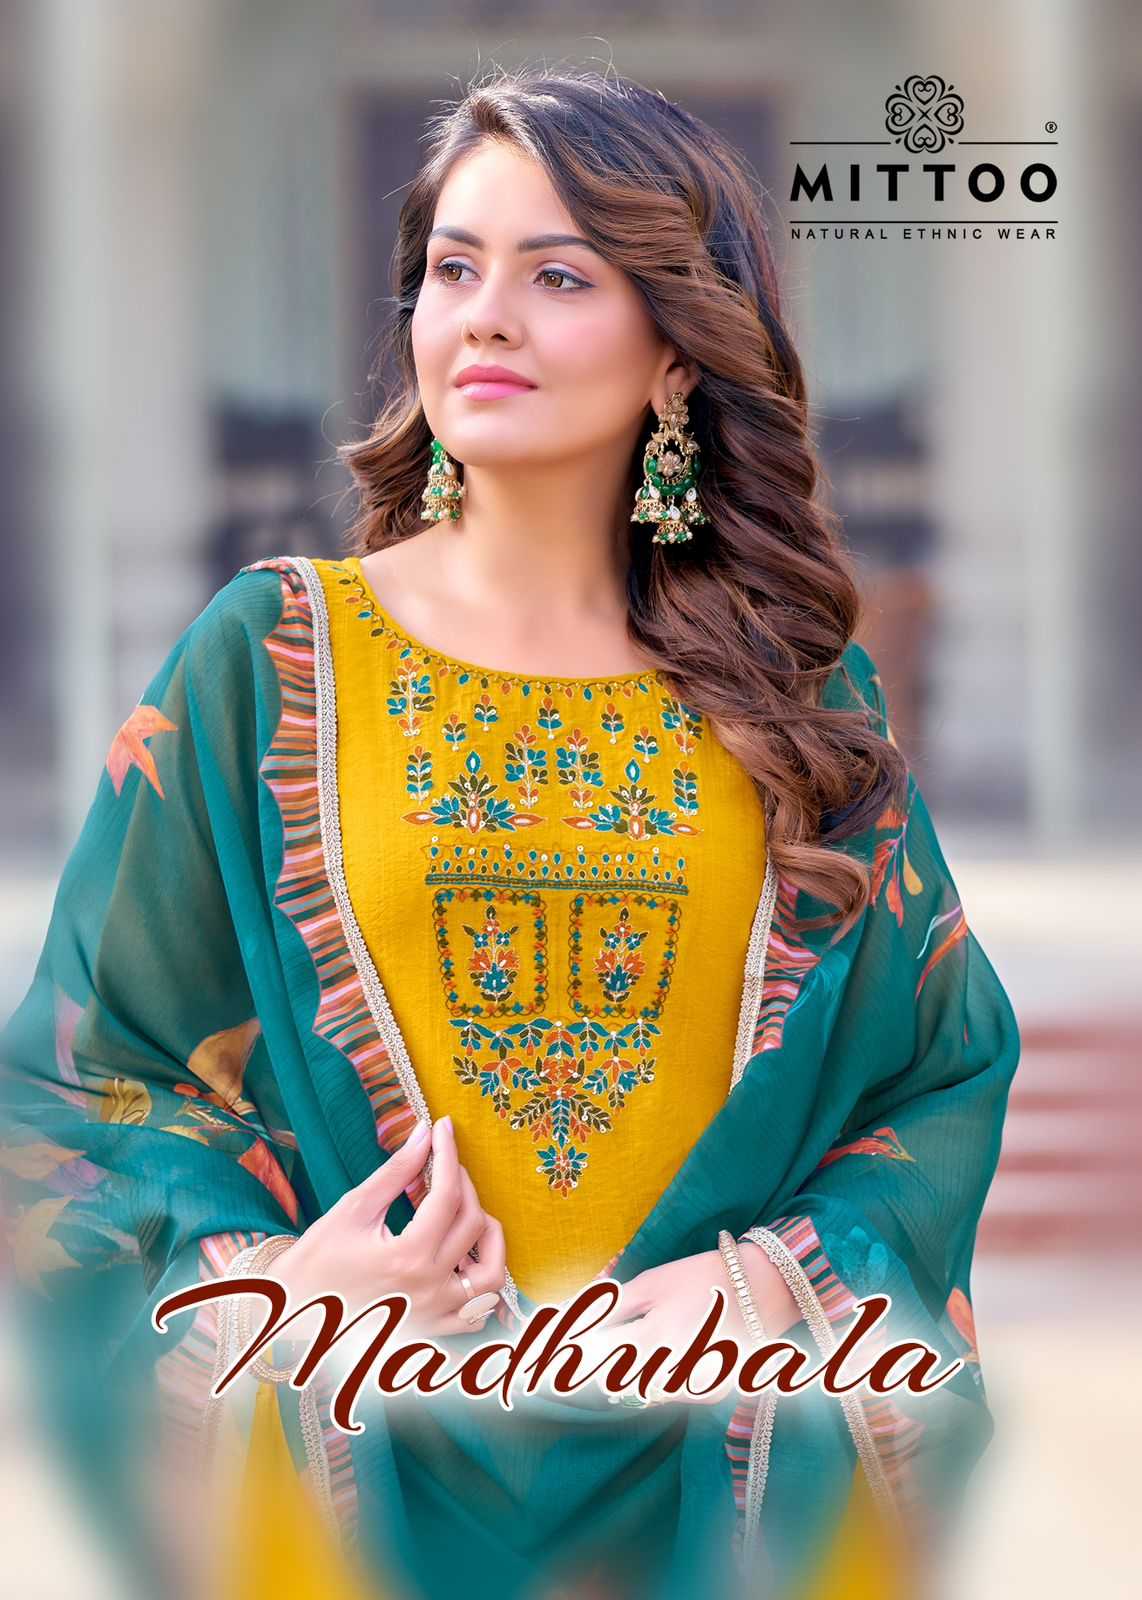 mittoo madhubala beautiful 3psc readymade suits for women 